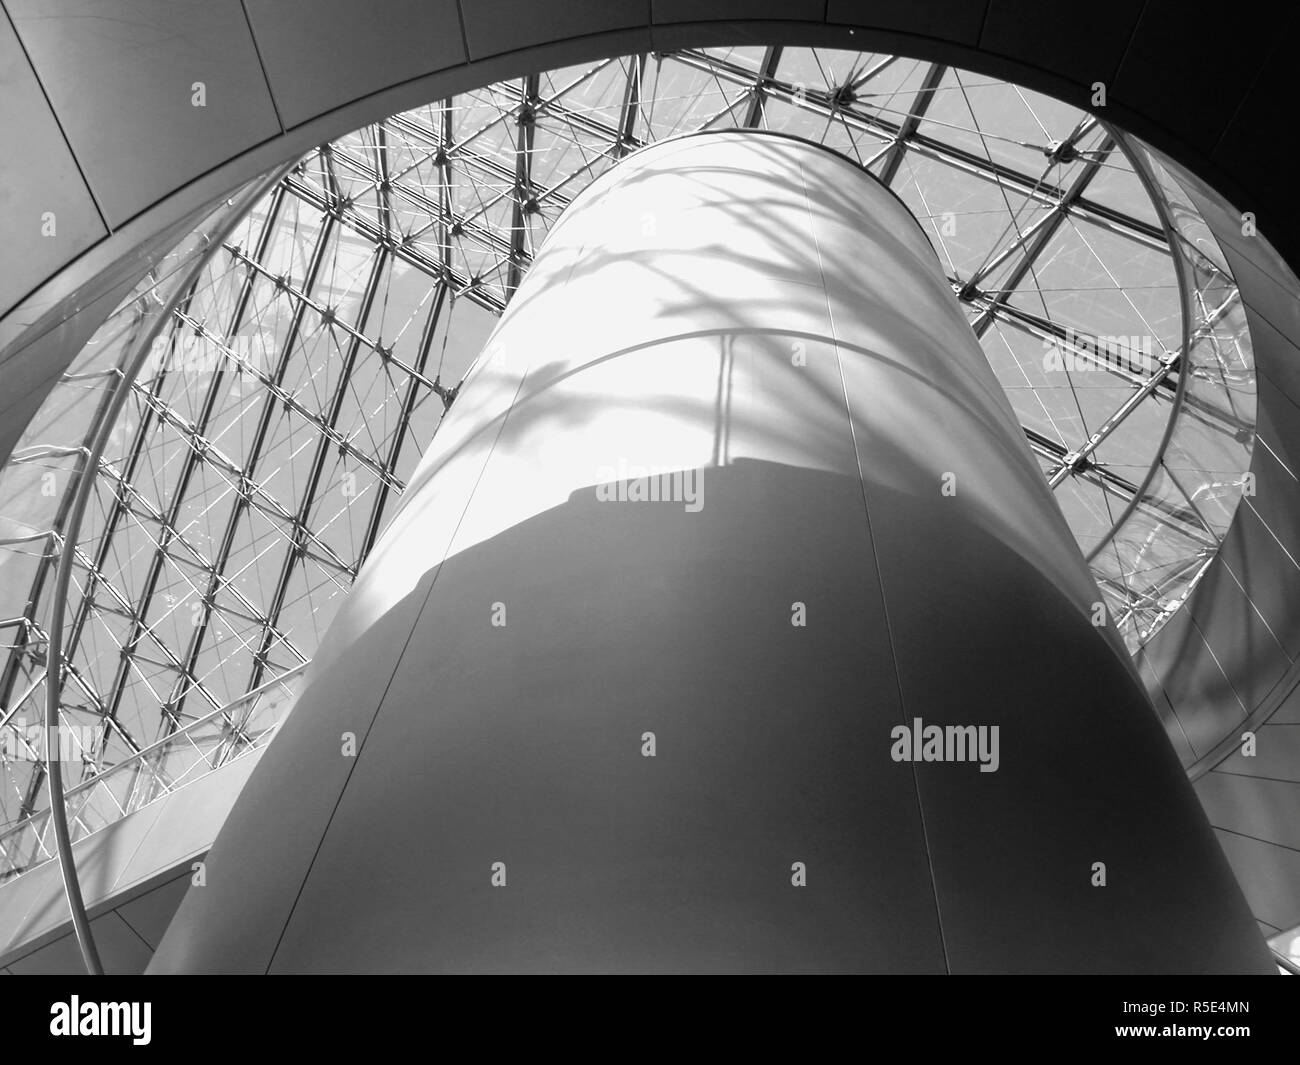 Inside the Pyramid, Musée du Louvre, Paris, France:  looking up towards the glass roof. Black and white version Stock Photo